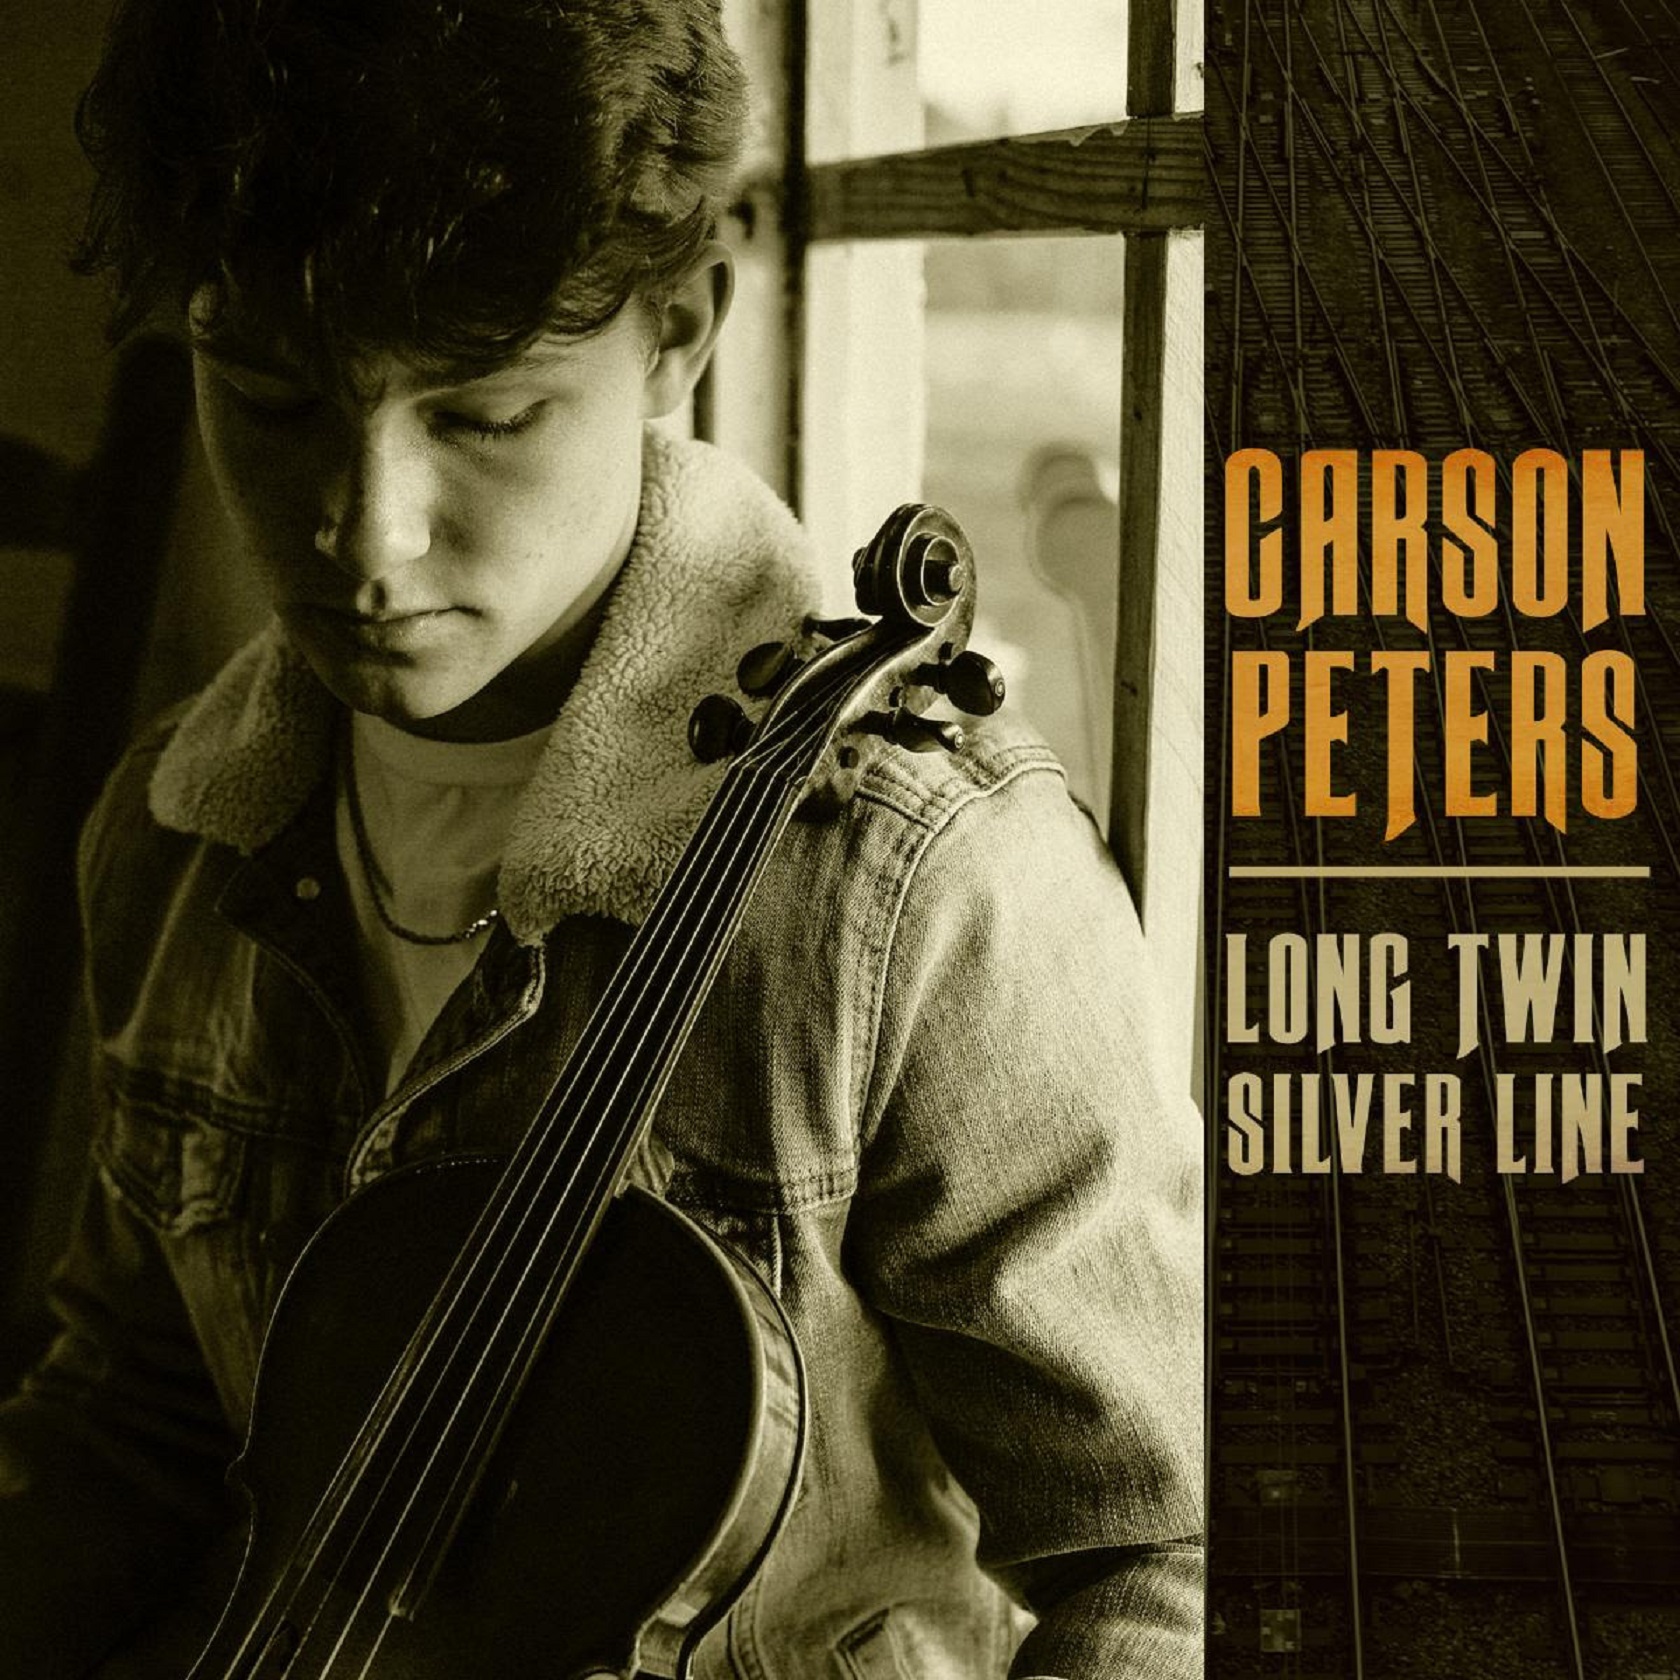 Carson Peters’ Fiery Fiddle And Stand-Out Vocal Burn Through Seger's "Long Twin Silver Line"